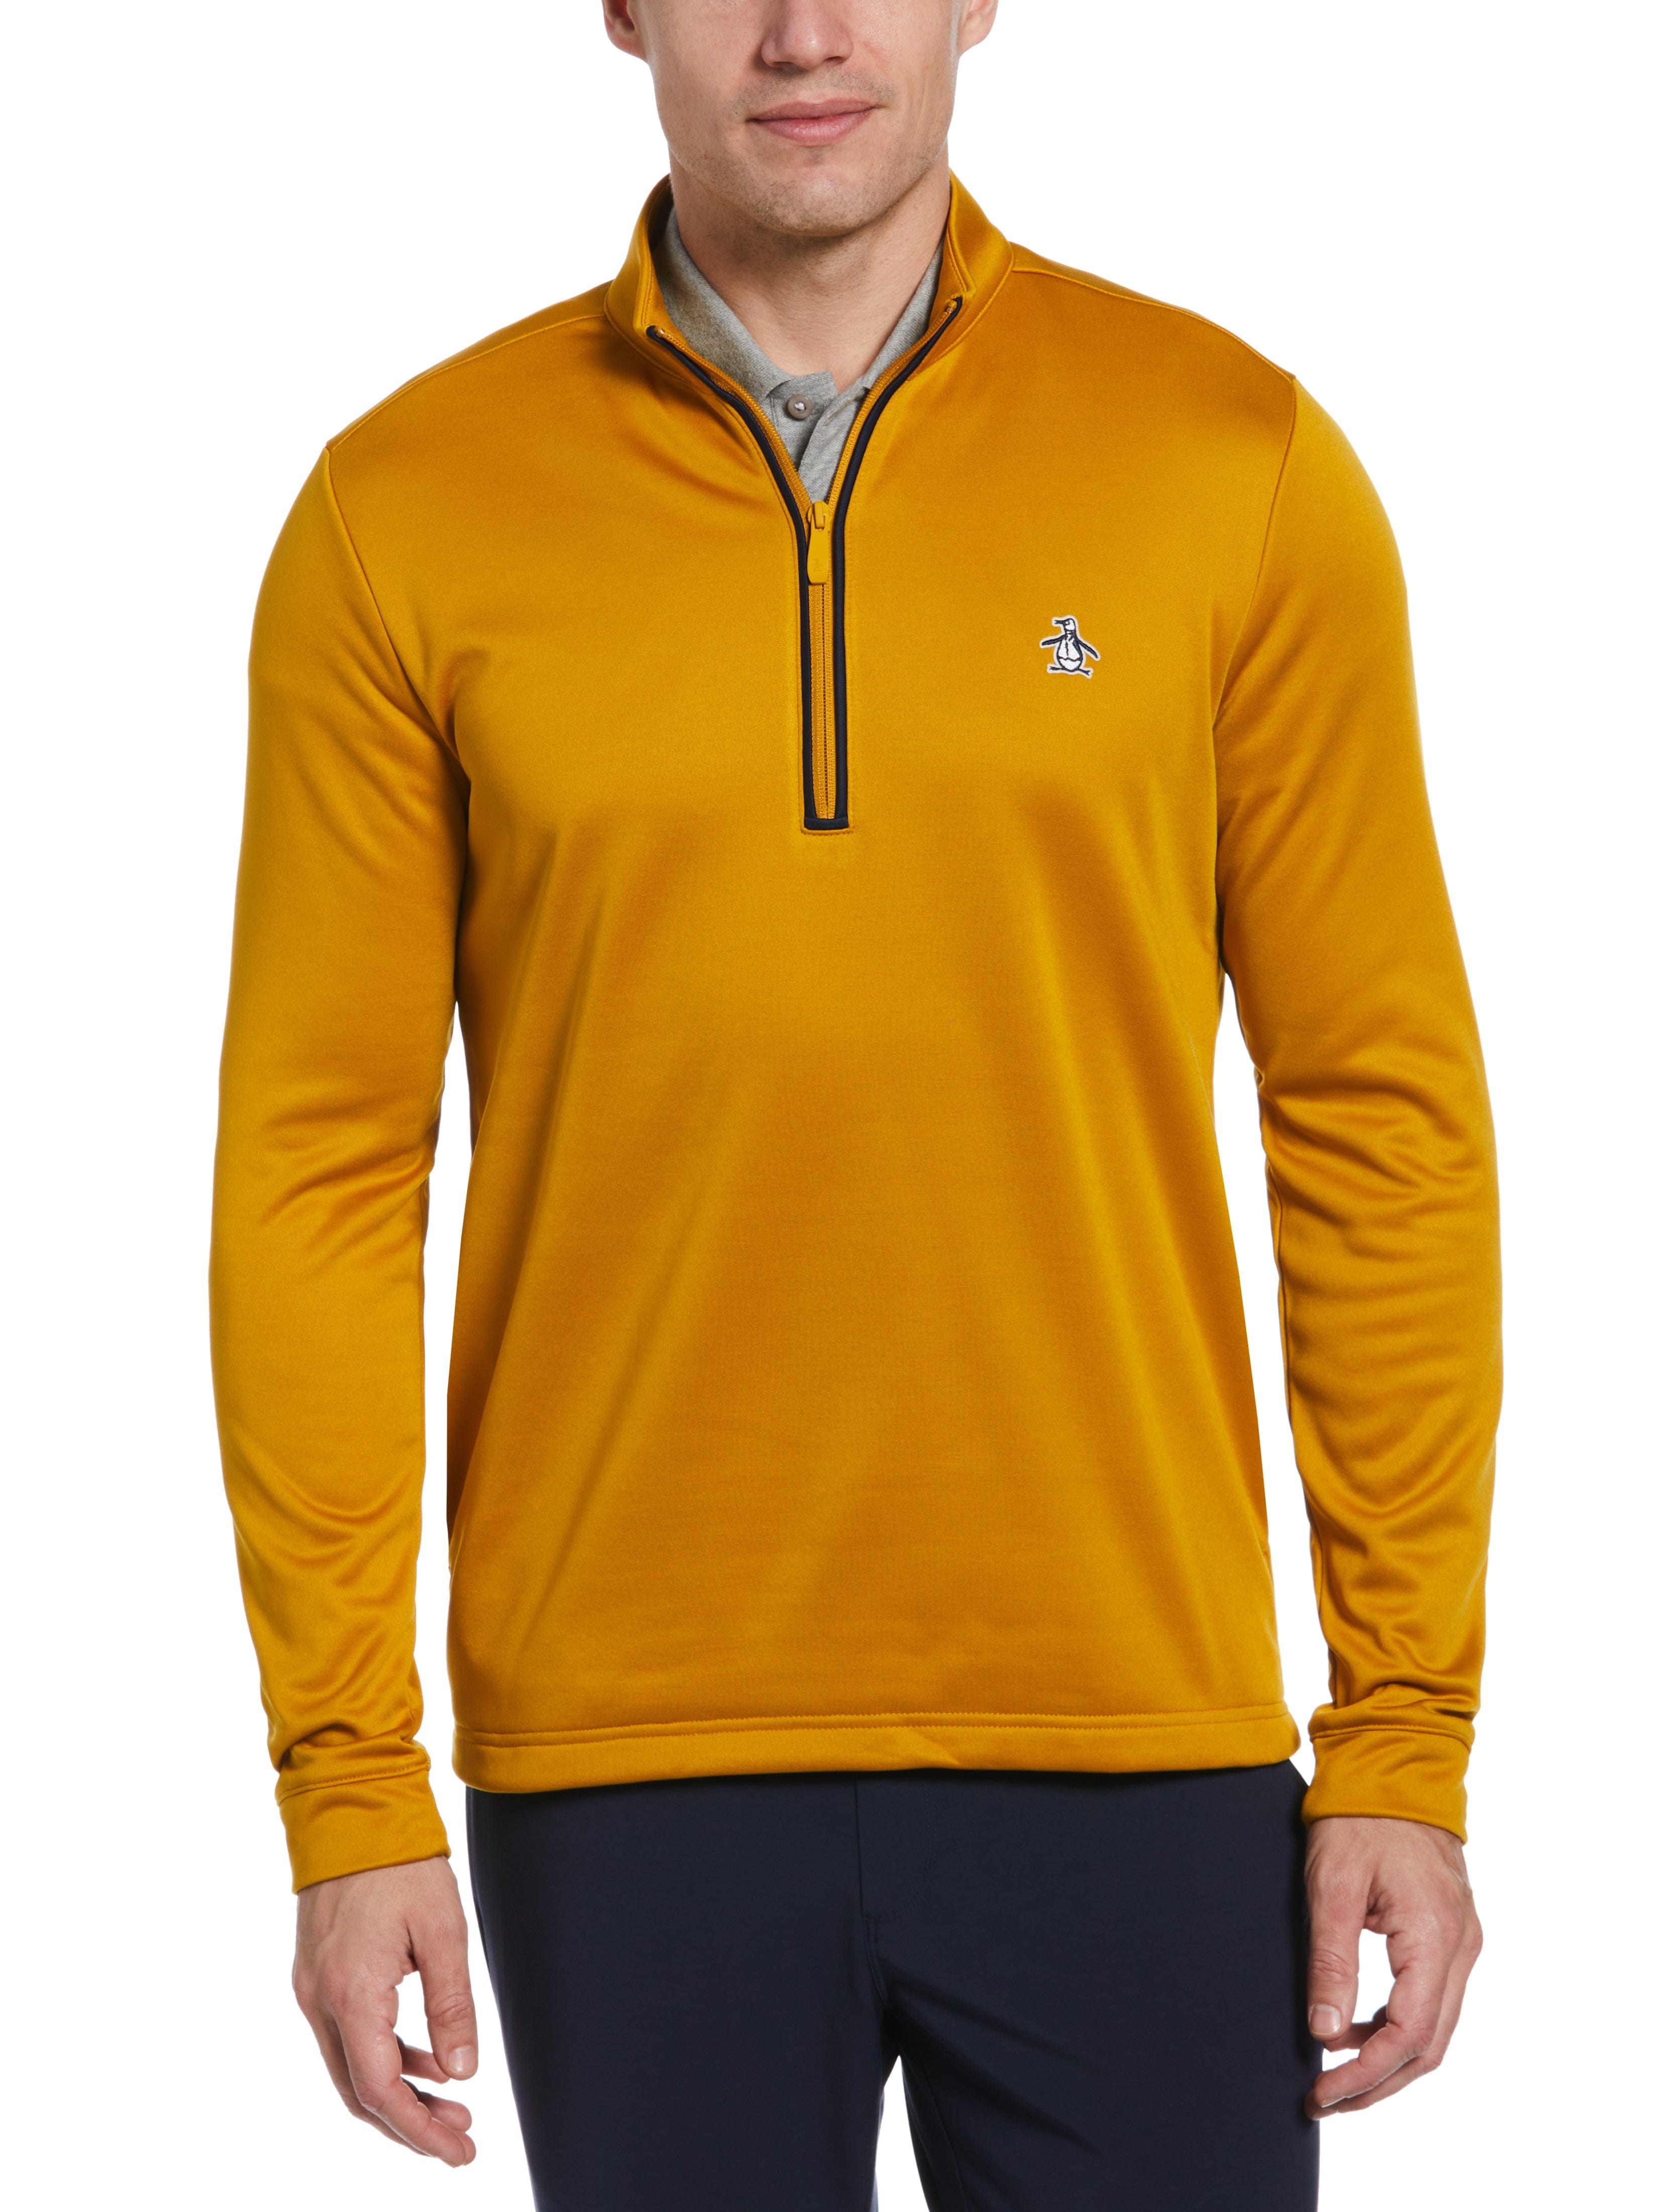 Original Penguin Mens 1/4 Zip Pull Over Jacket Top, Size Small, Chai Tea Yellow, 100% Polyester | Golf Apparel Shop